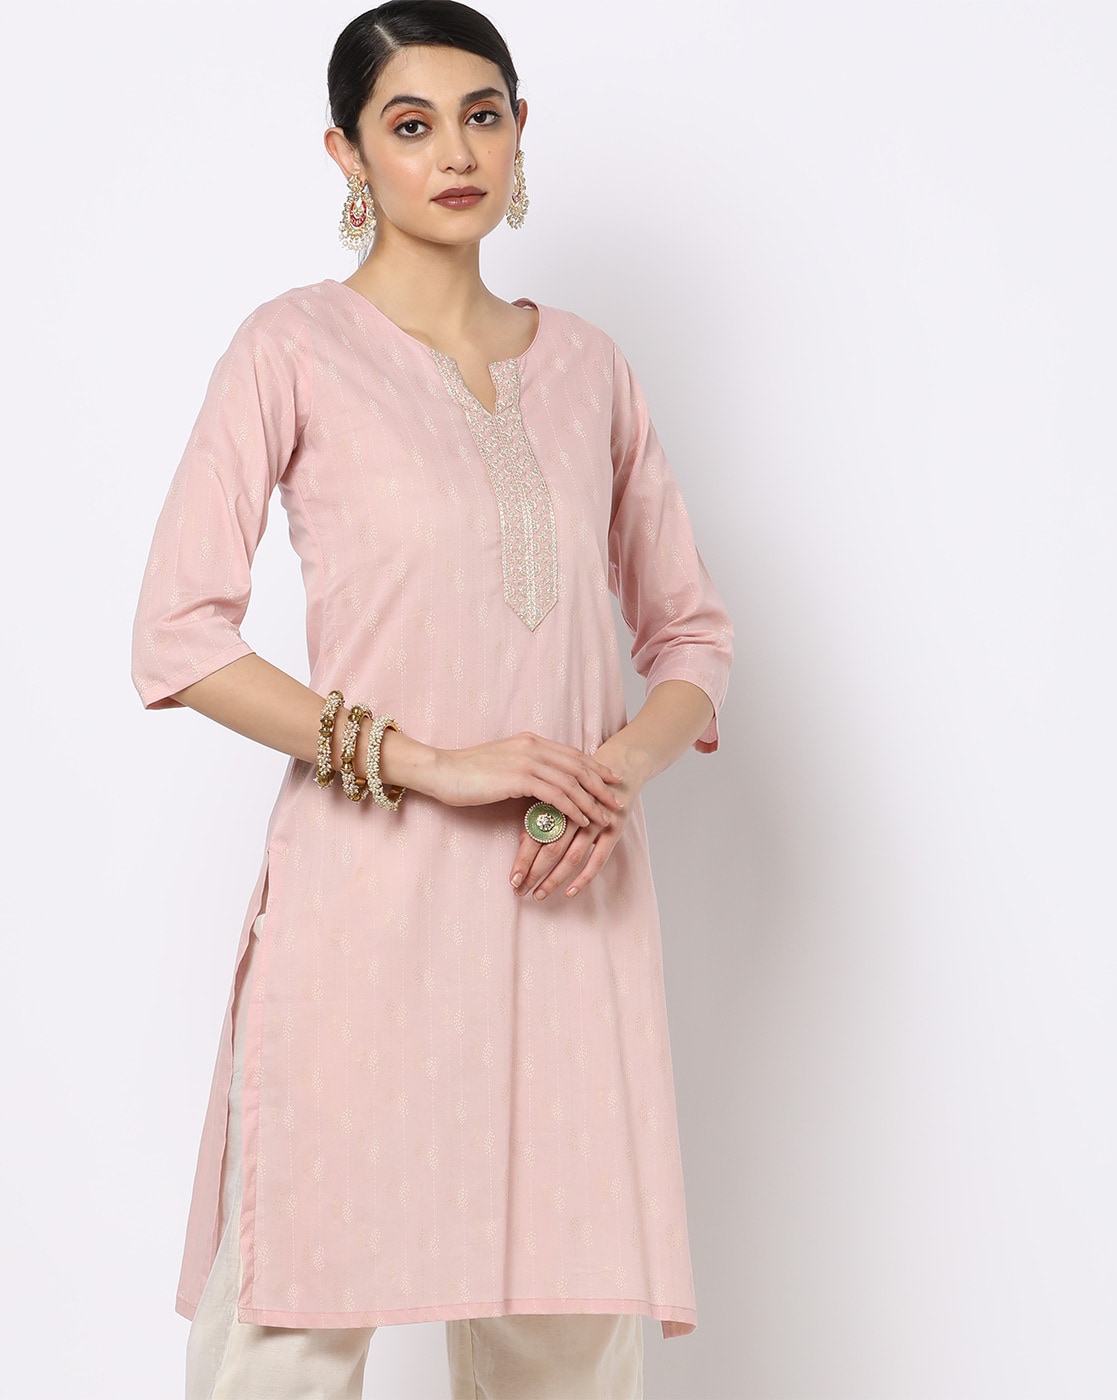 Foil Printed Art Silk Kurta Jacket Set in Off White and Pink : MGV1071